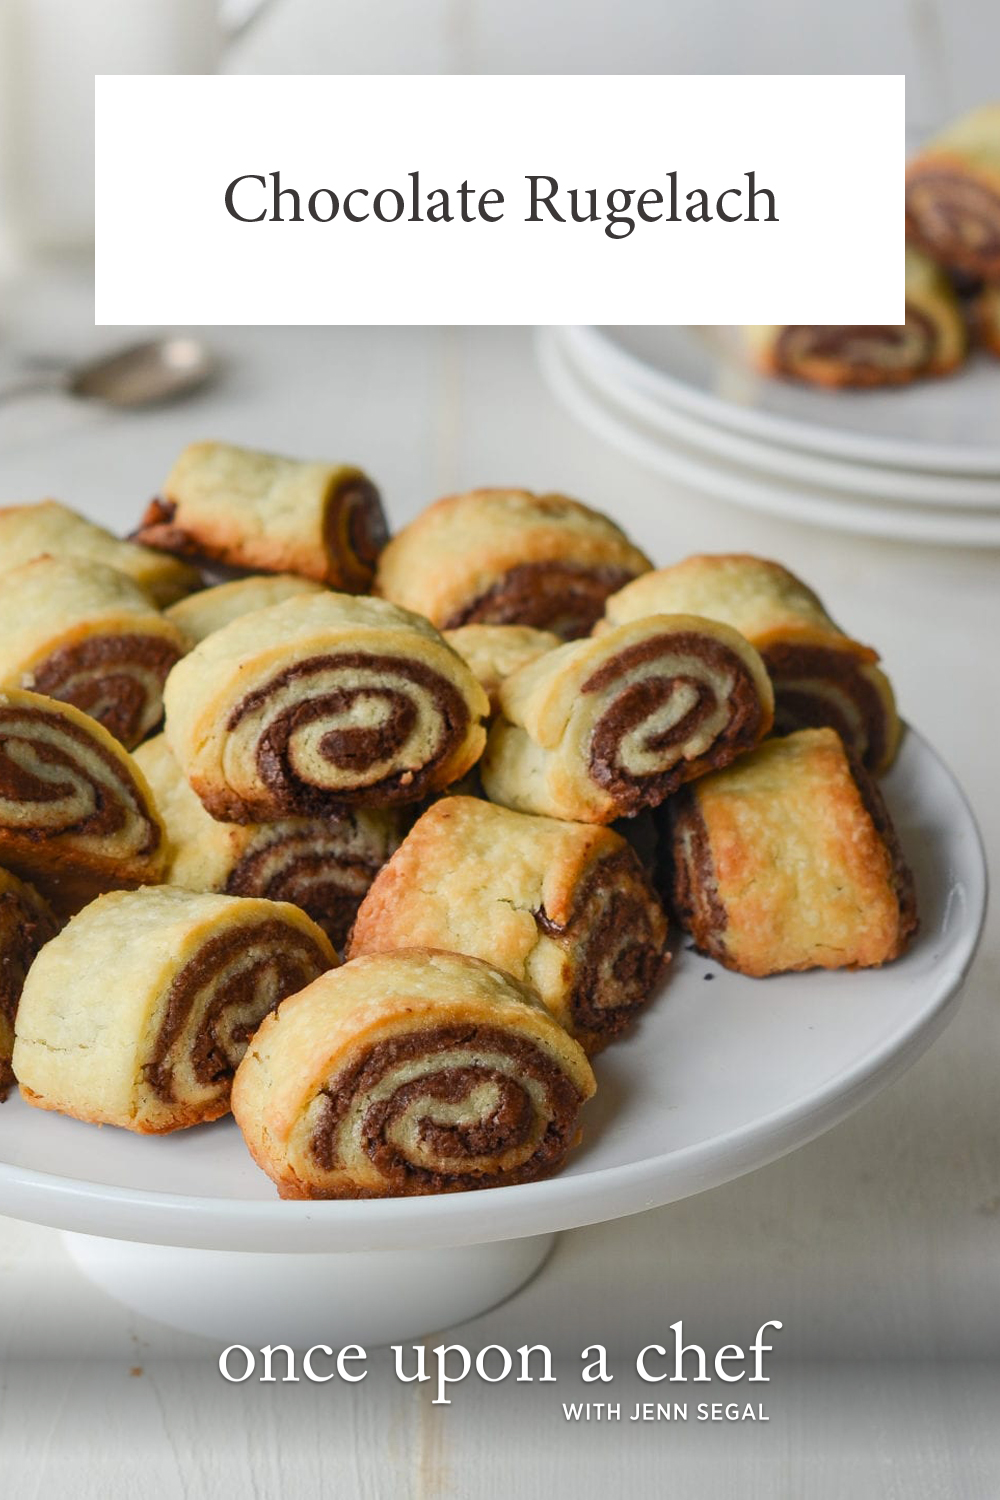 Chocolate Rugelach - Once Upon a Chef